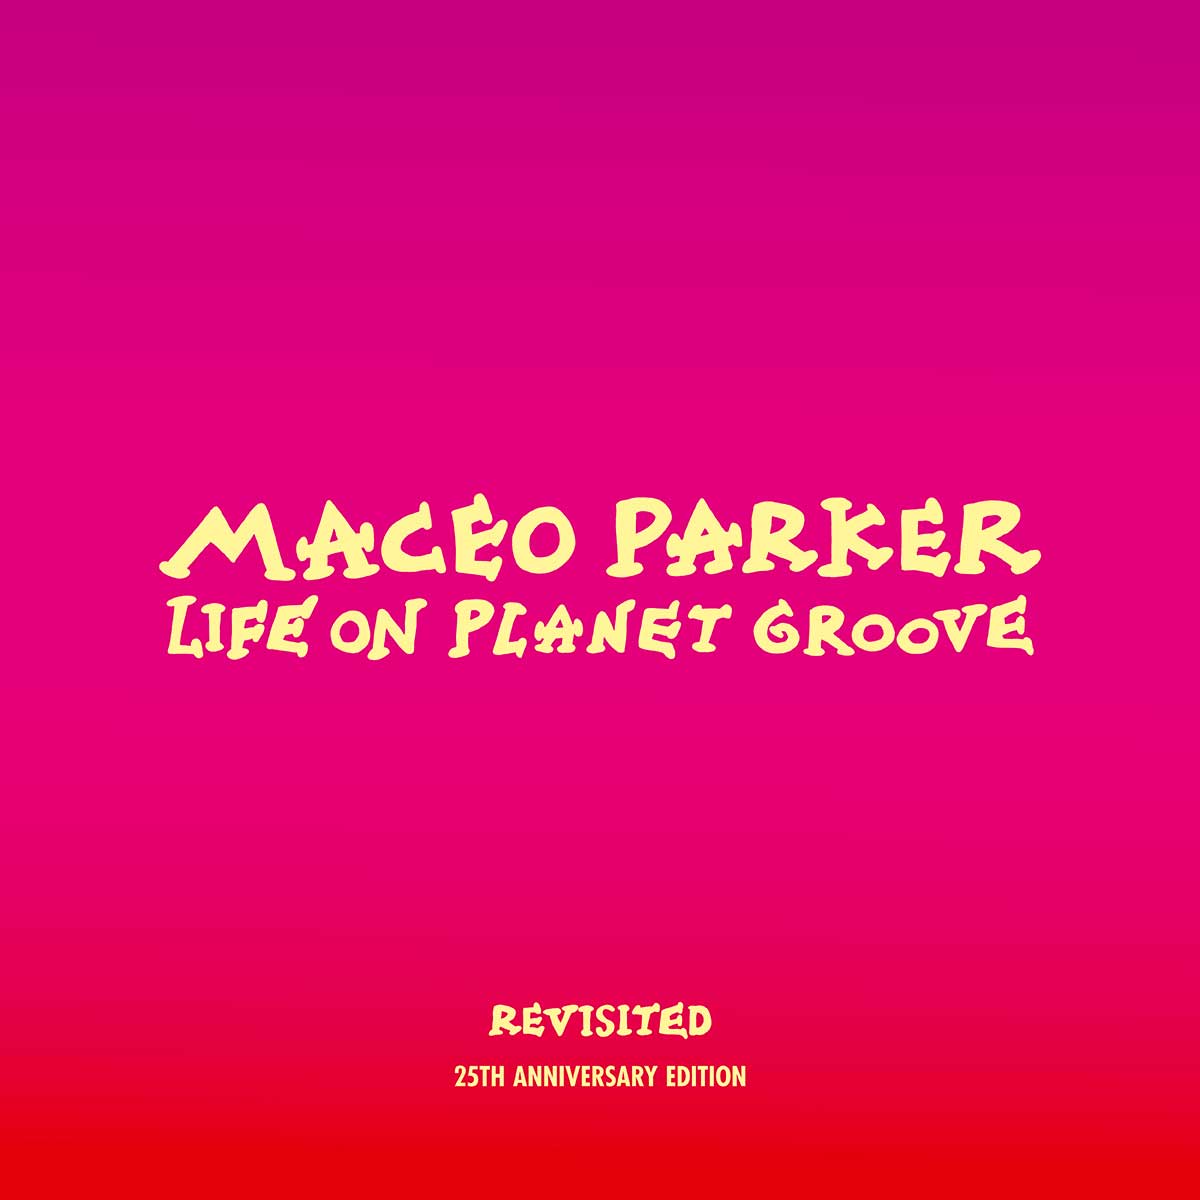 Maceo Parker Life On Planet Groove Revisited (CD)